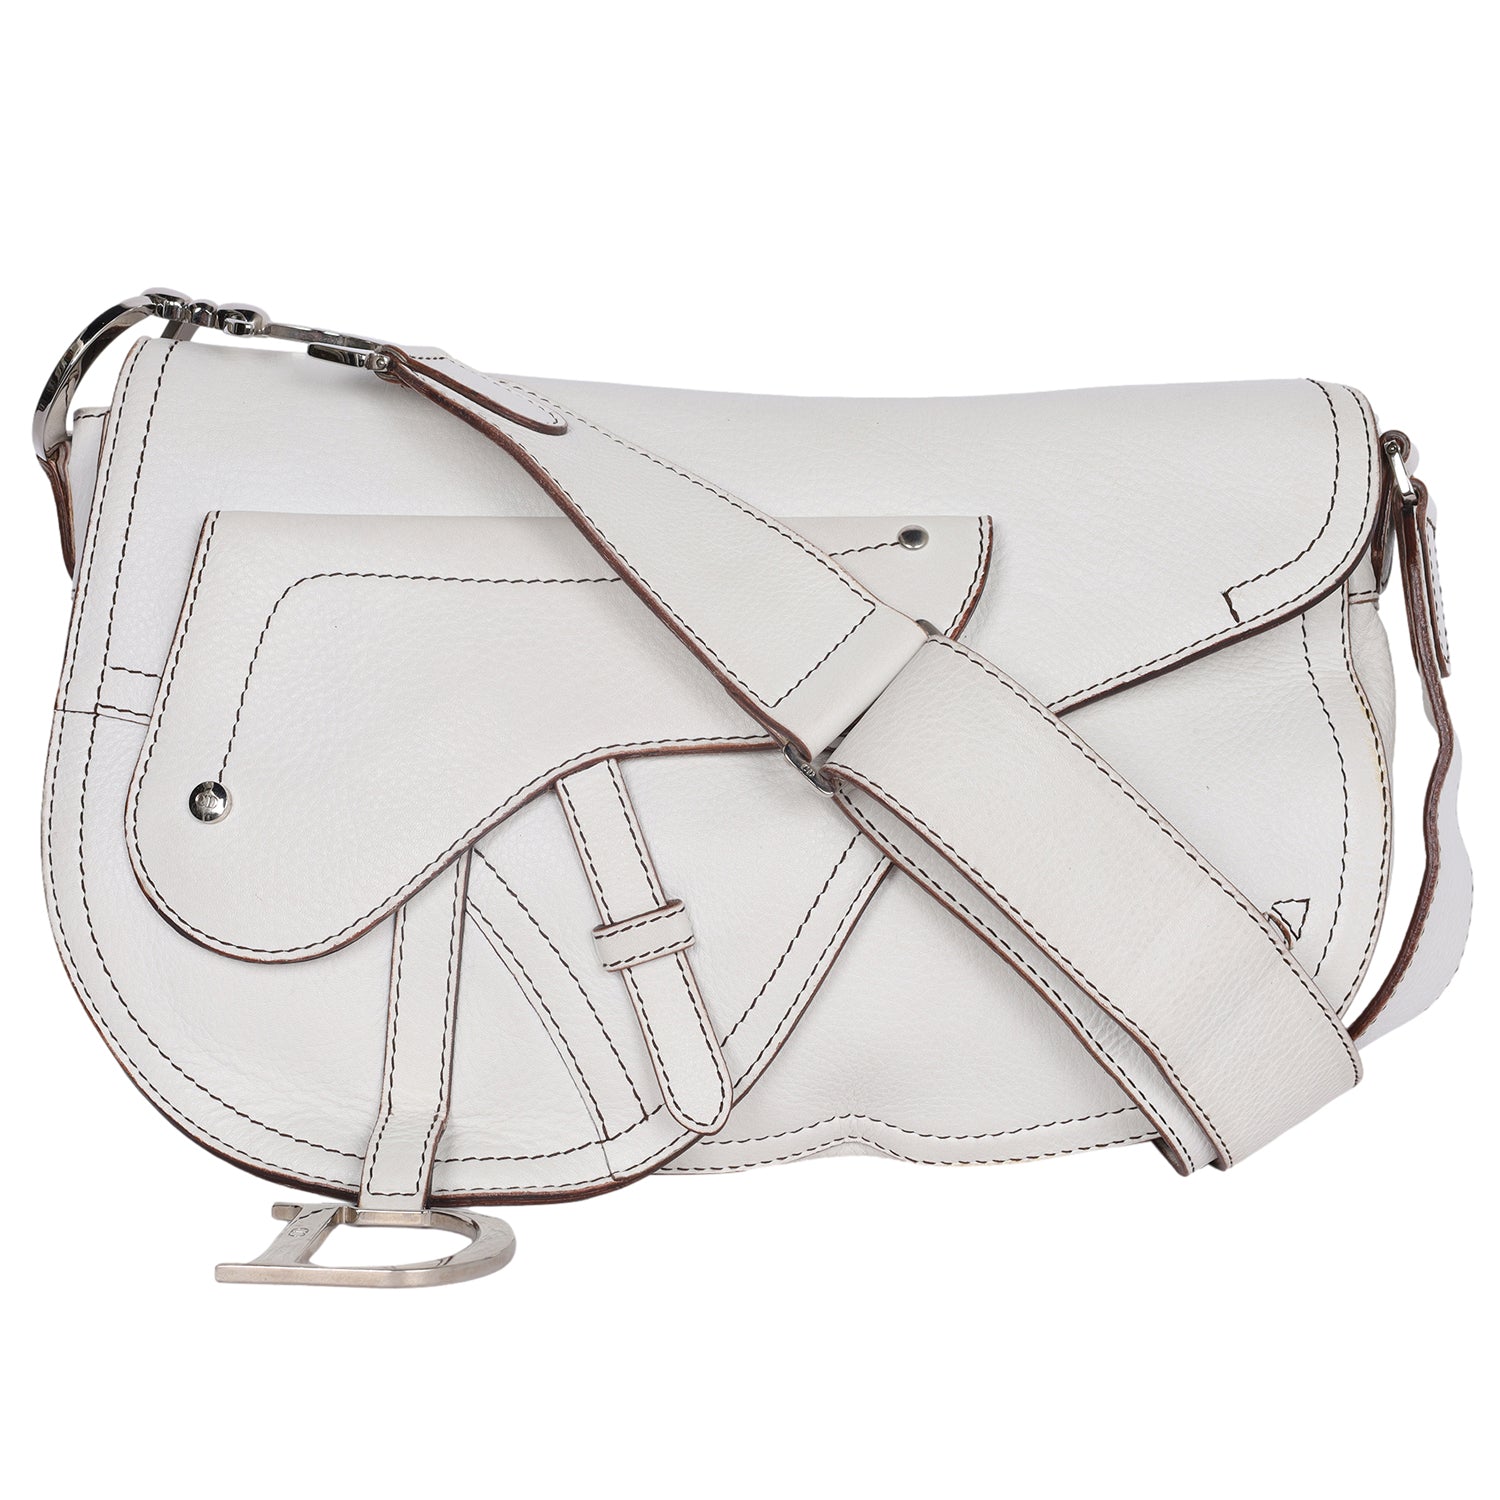 Dior Saddle Bags for Women, Authenticity Guaranteed